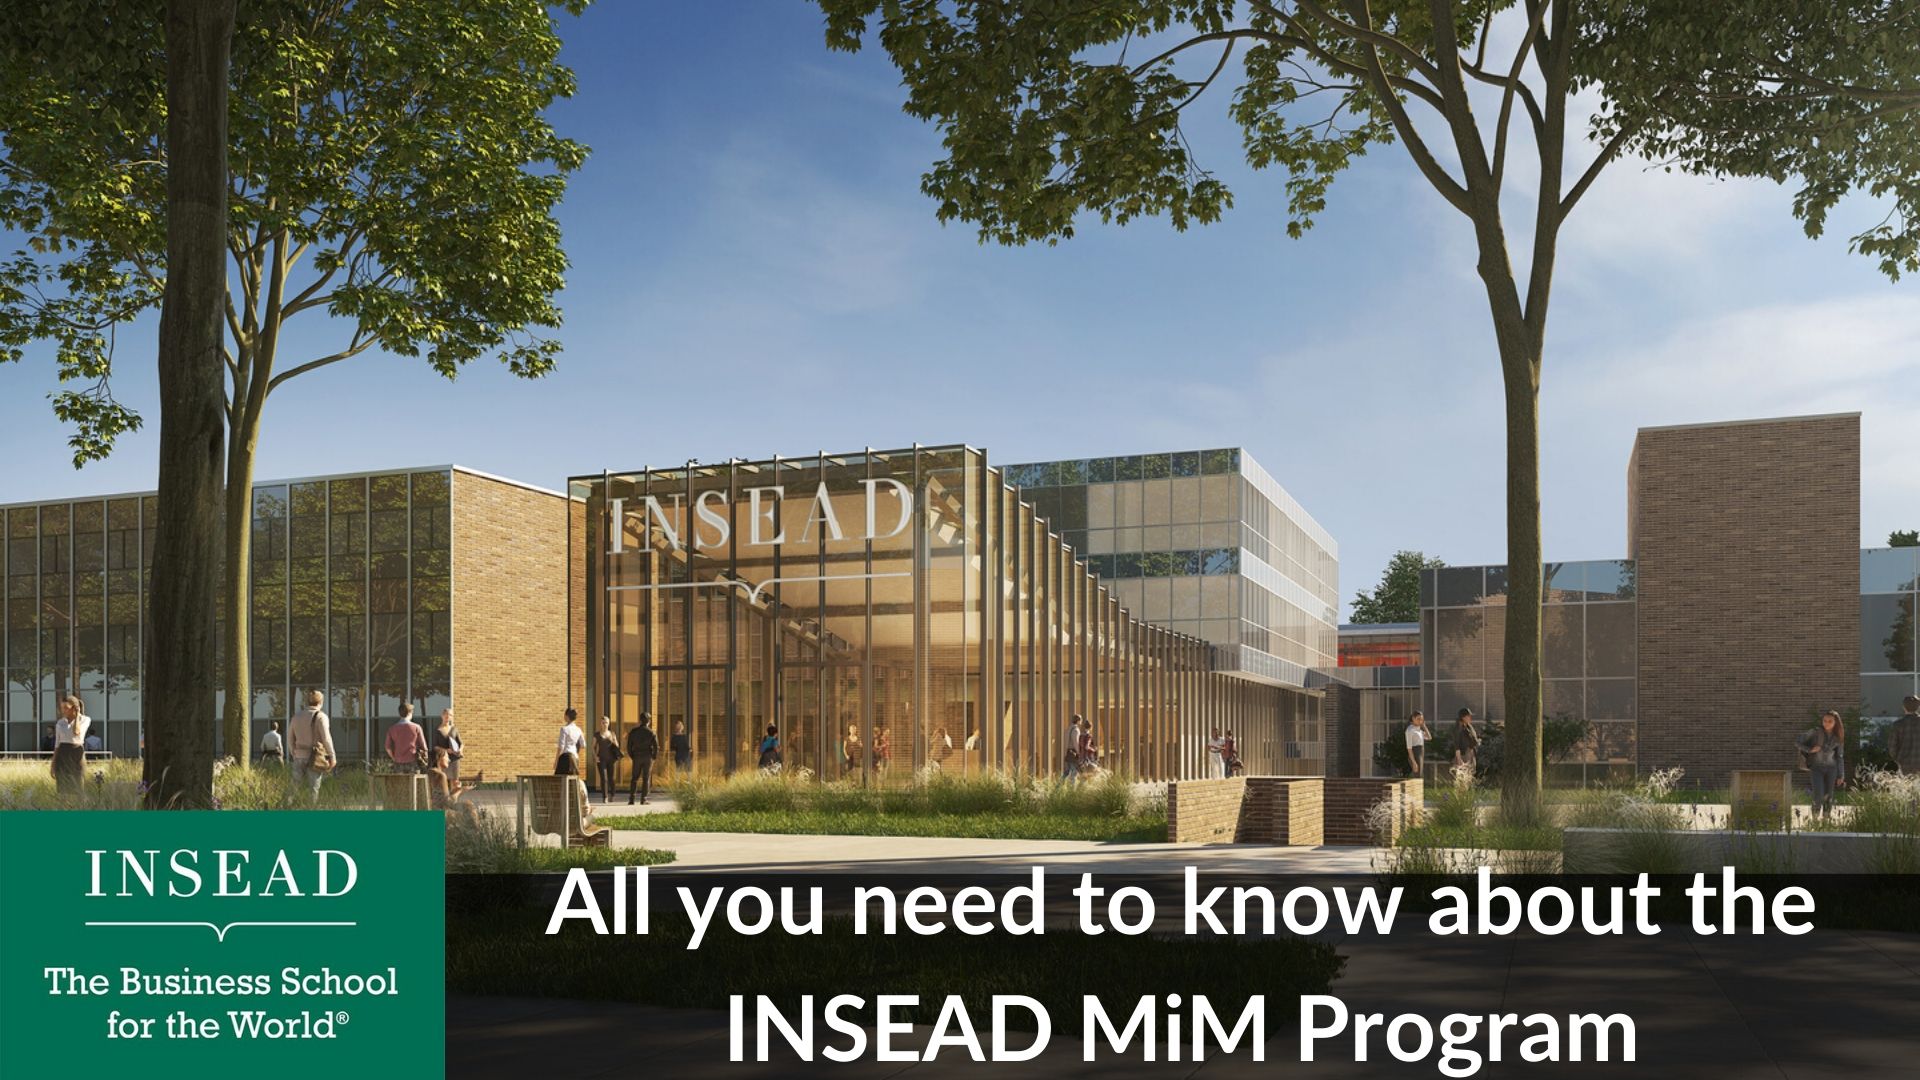 INSEAD MiM Program – All you need to know